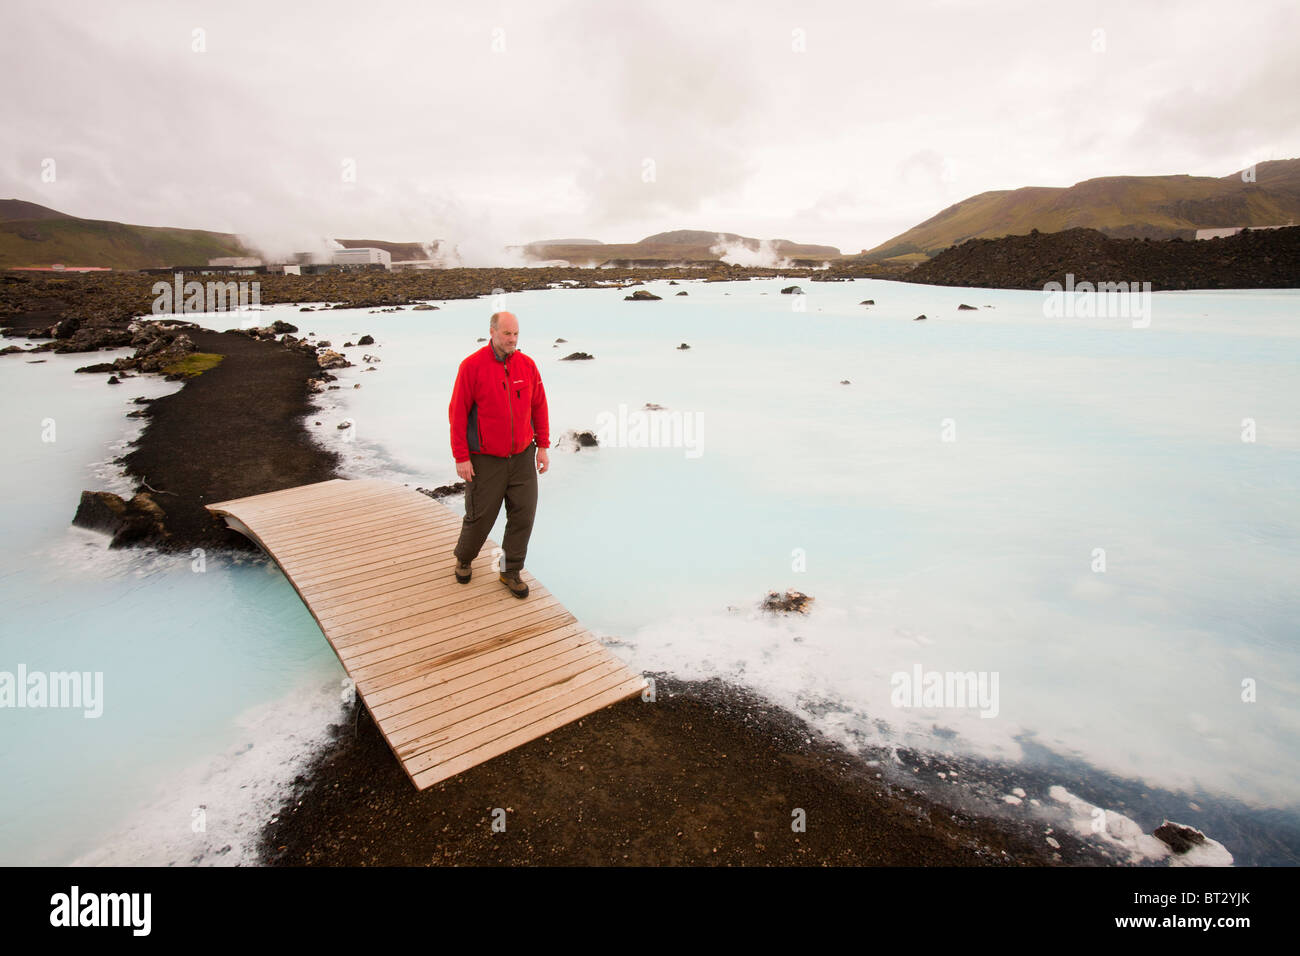 The Blue Lagoon near at Keflavik in Iceland. Stock Photo